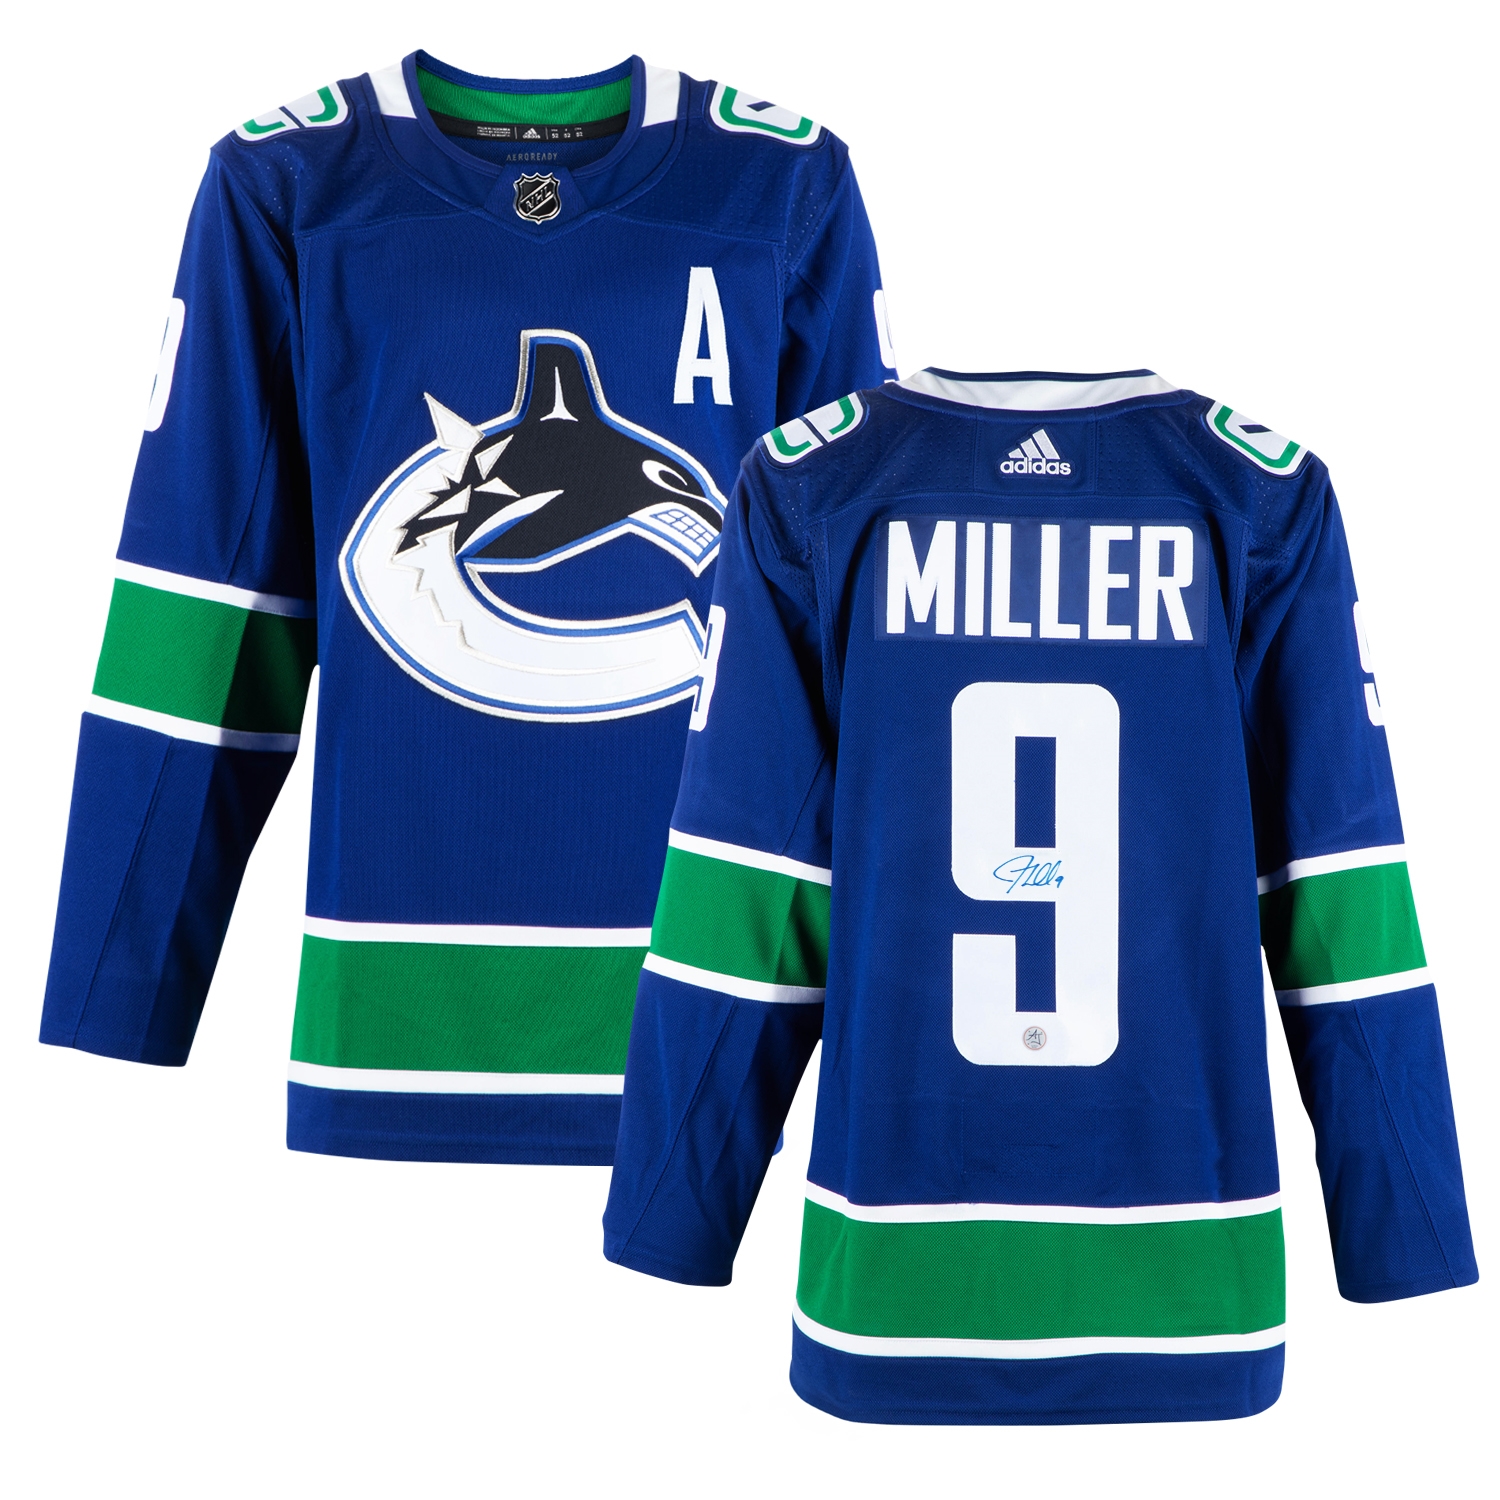 JT Miller Vancouver Canucks Autographed adidas Jersey